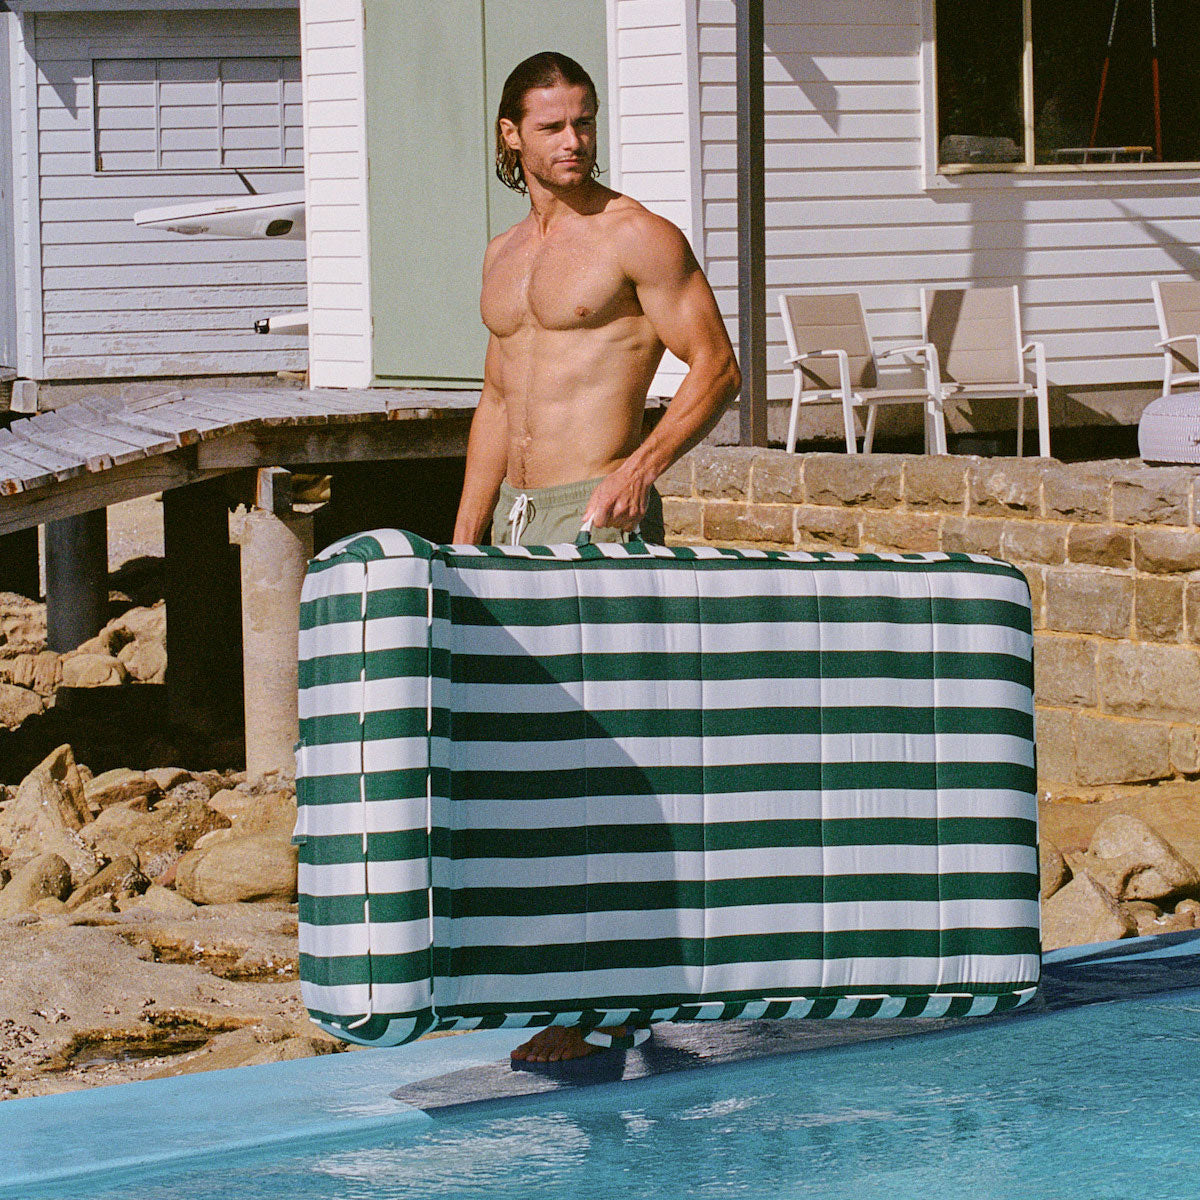 A man carrying a green and white striped luxury pool float on the edge of a swimming pool with a pool house and rocks int he background.